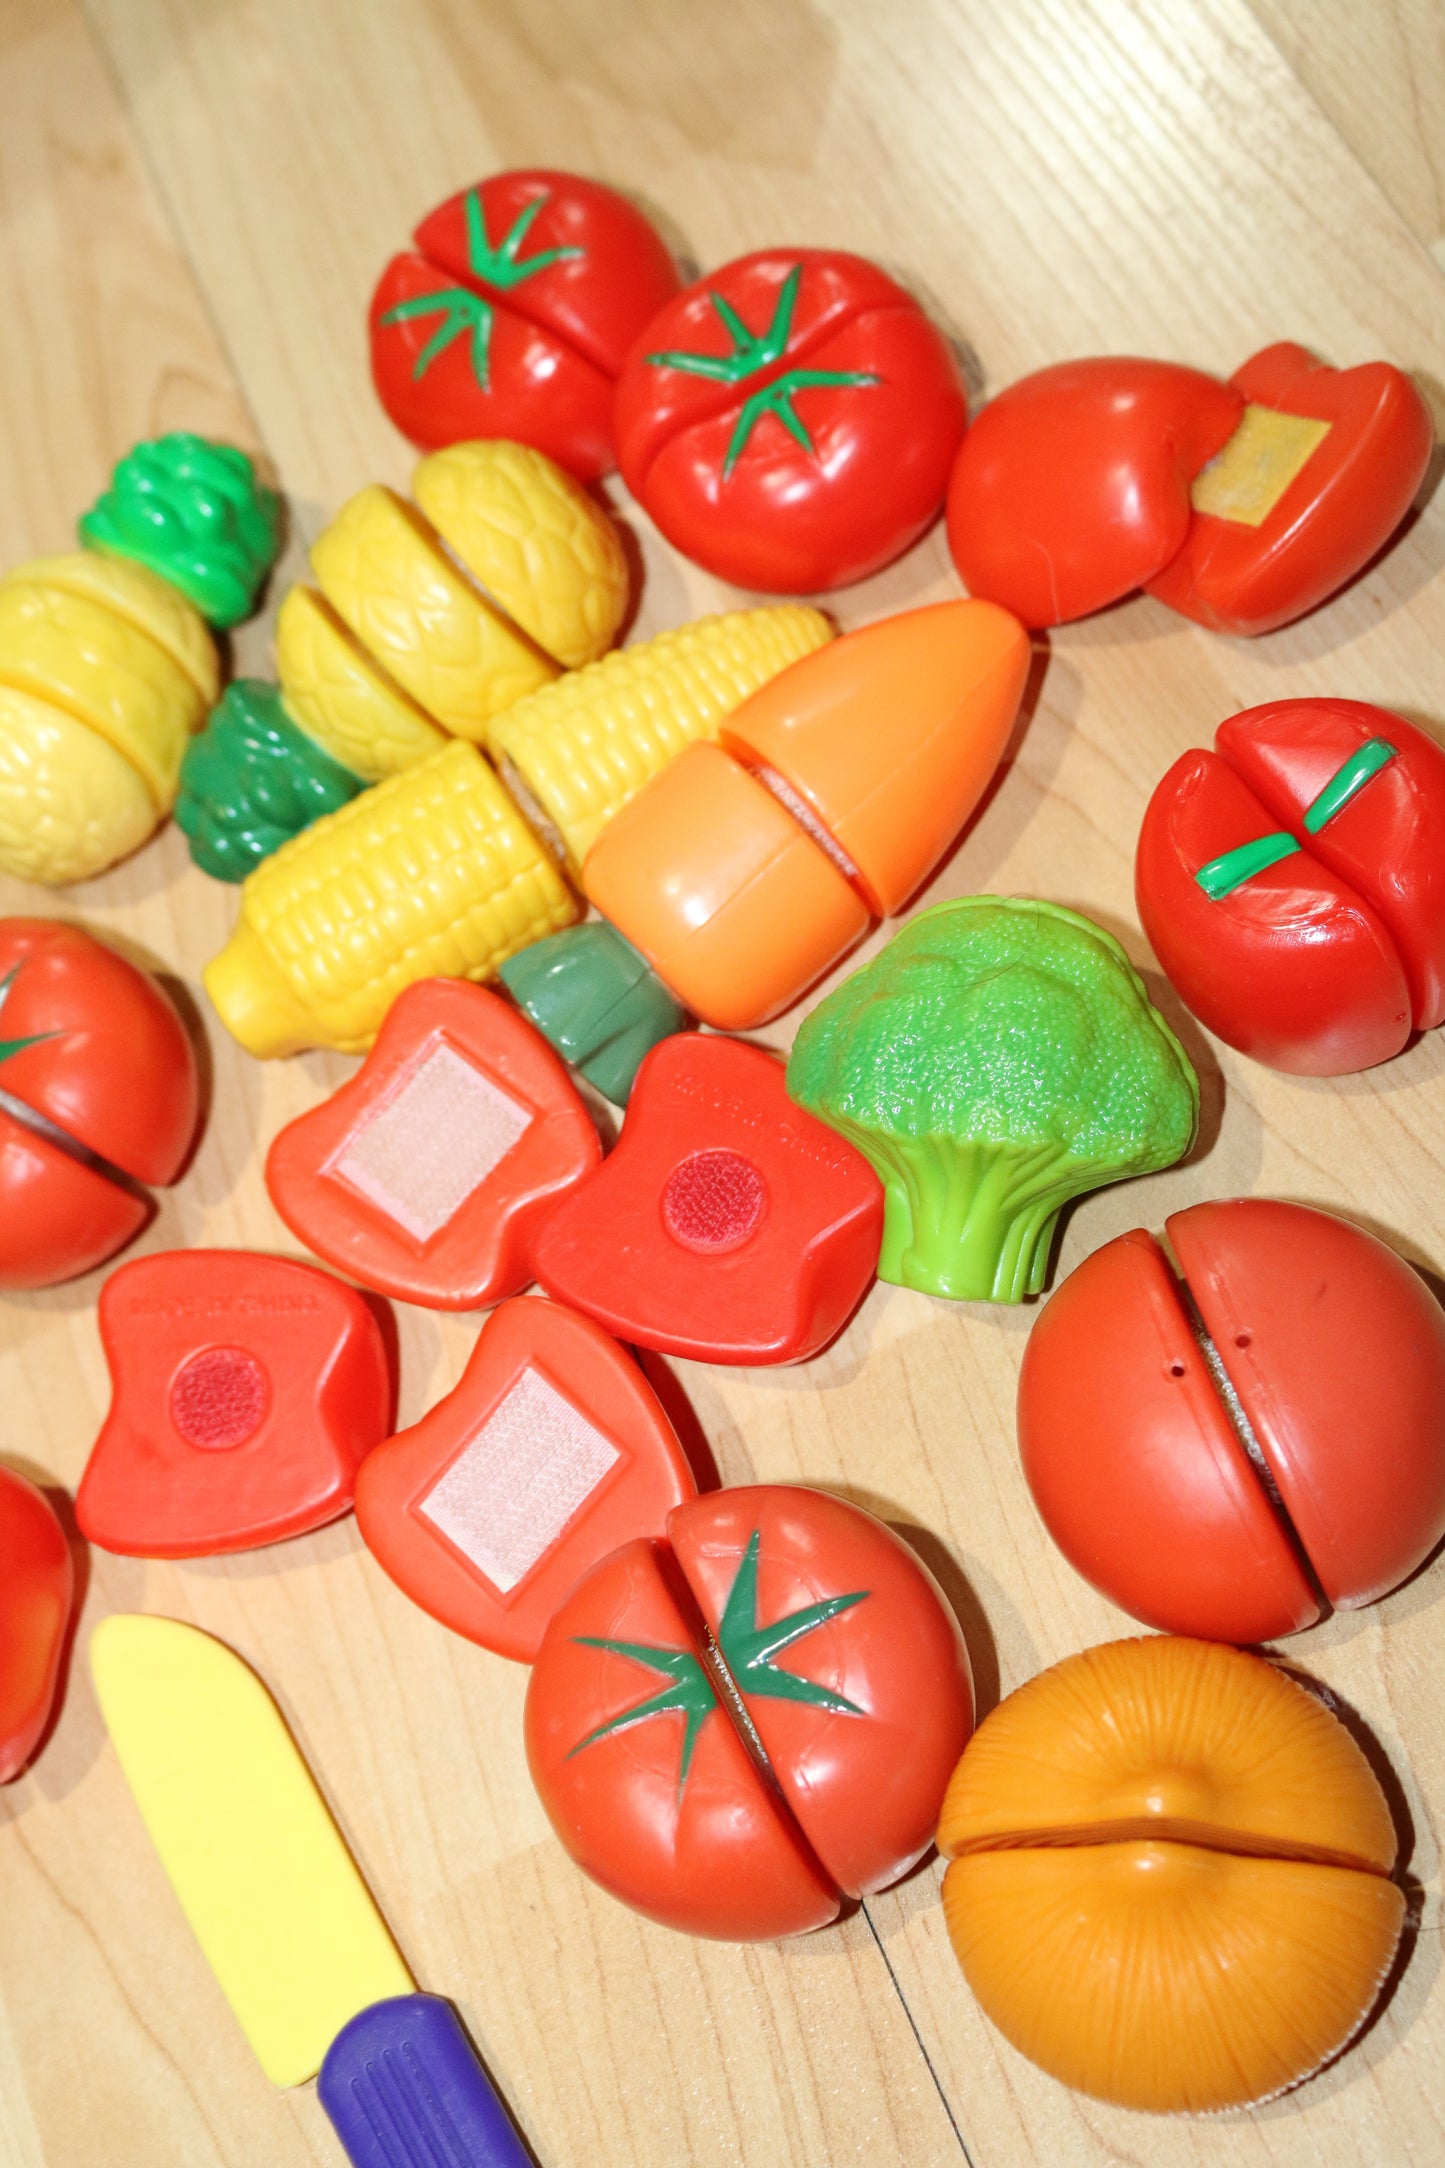 Play kitchen fruits & Vegetables toys Dishes Mixed Lot Played With Condition